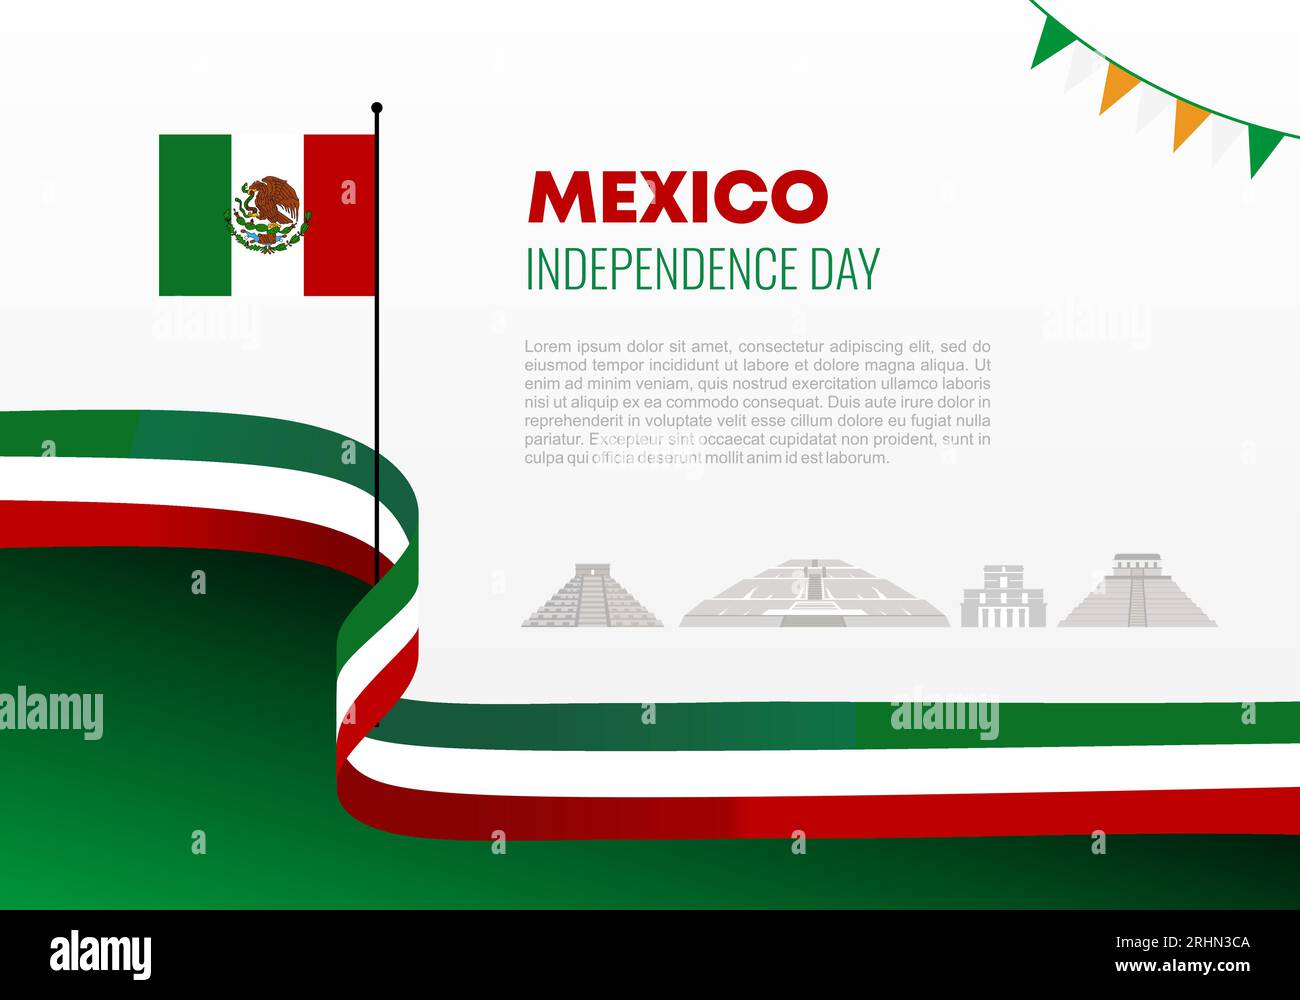 Mexico independence day background banner poster for national celebration on 16 and 17 september. Stock Vector